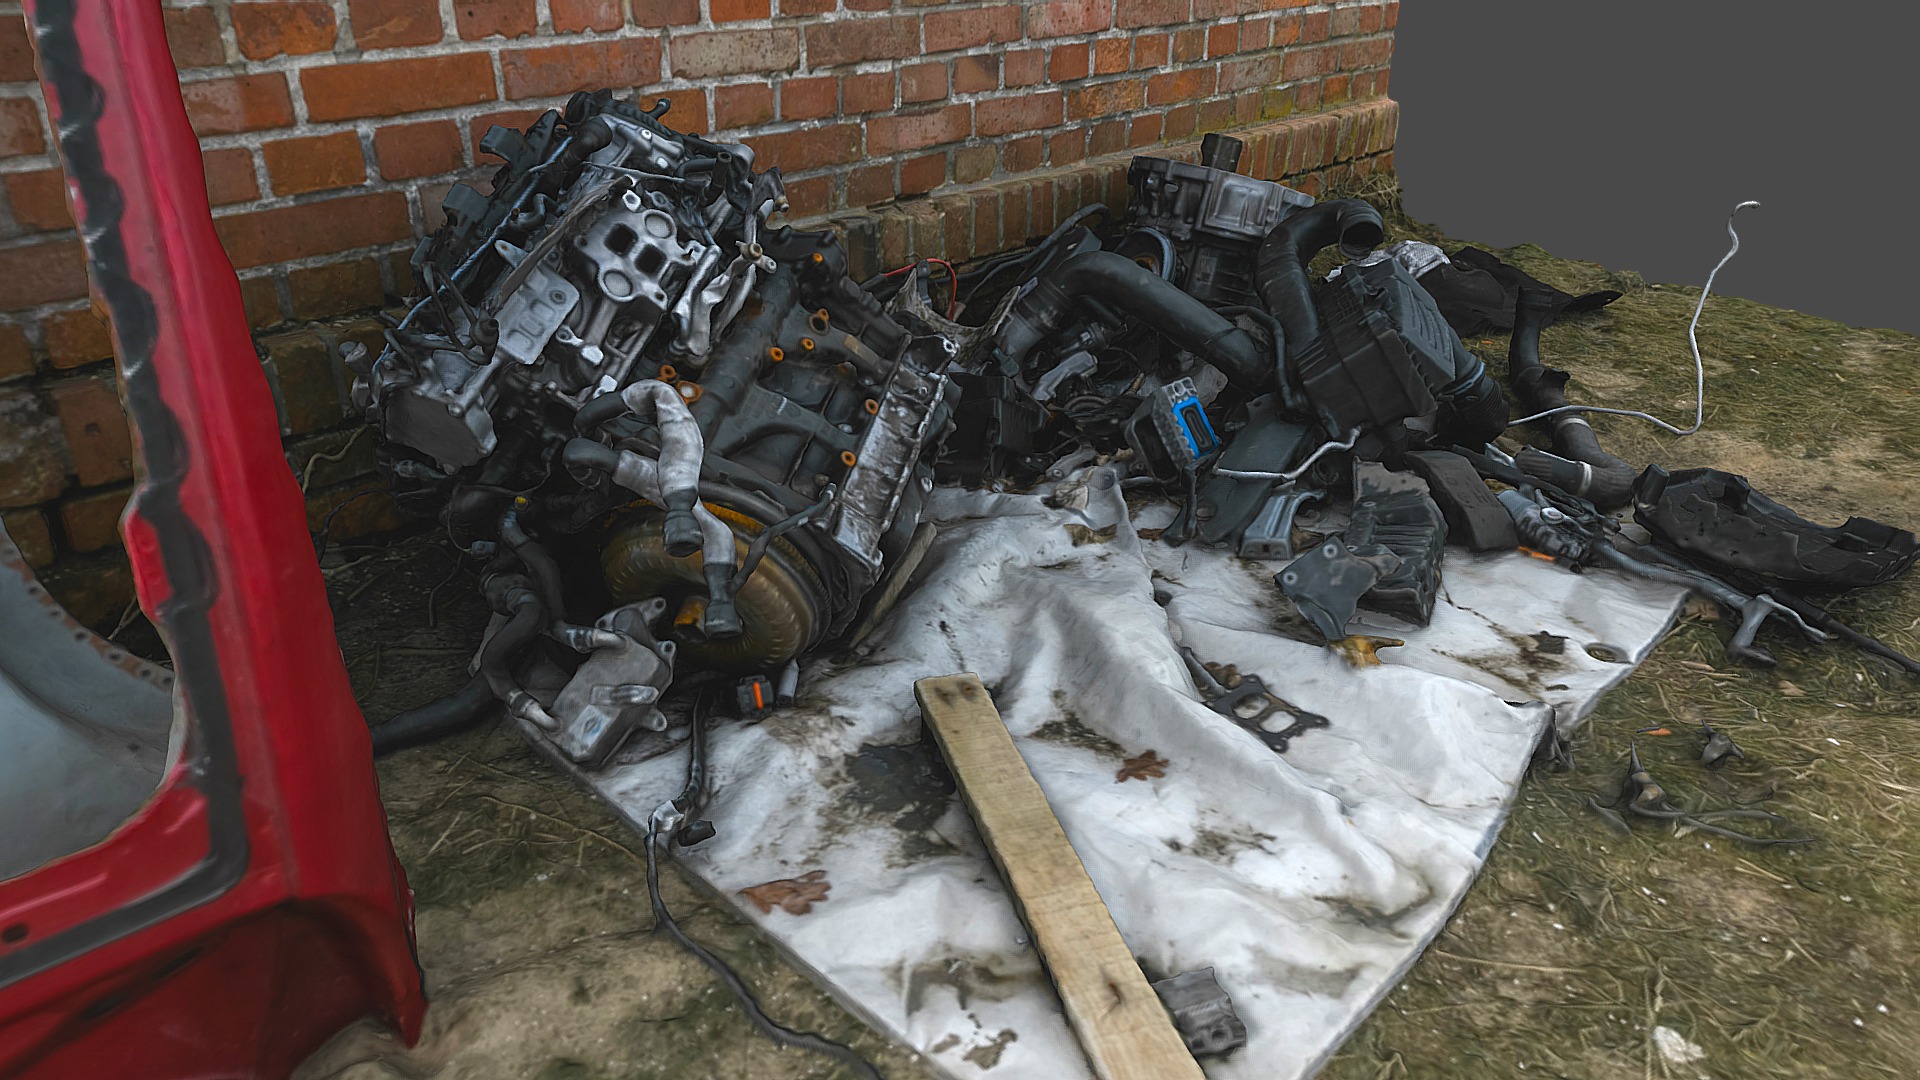 3D model Scrap metal auto engine - This is a 3D model of the Scrap metal auto engine. The 3D model is about a car that has crashed into a brick wall.